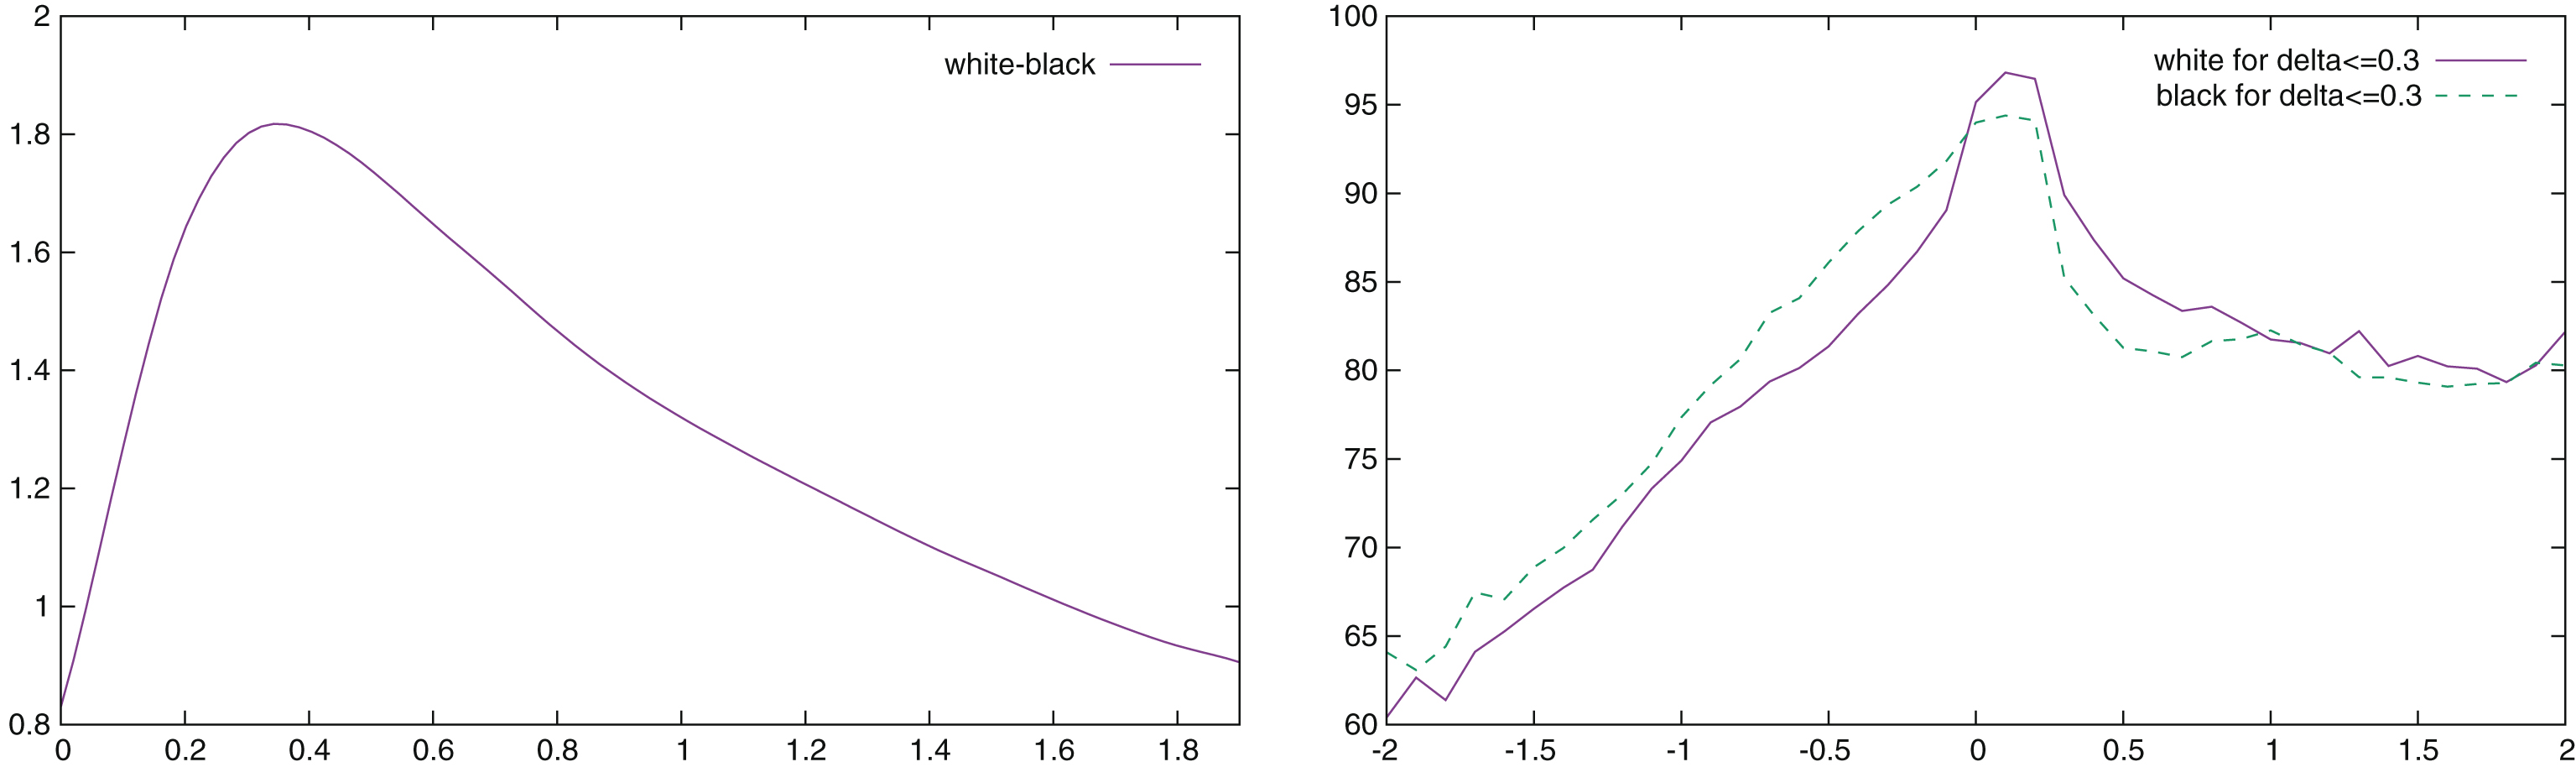 Difference between the accumulated raw conformance indicator of White and Black (in percent) as a function of δ (left), and percentage of moves with an accumulated raw conformance δ ≤ 0.3 as a function of the position evaluation (right).